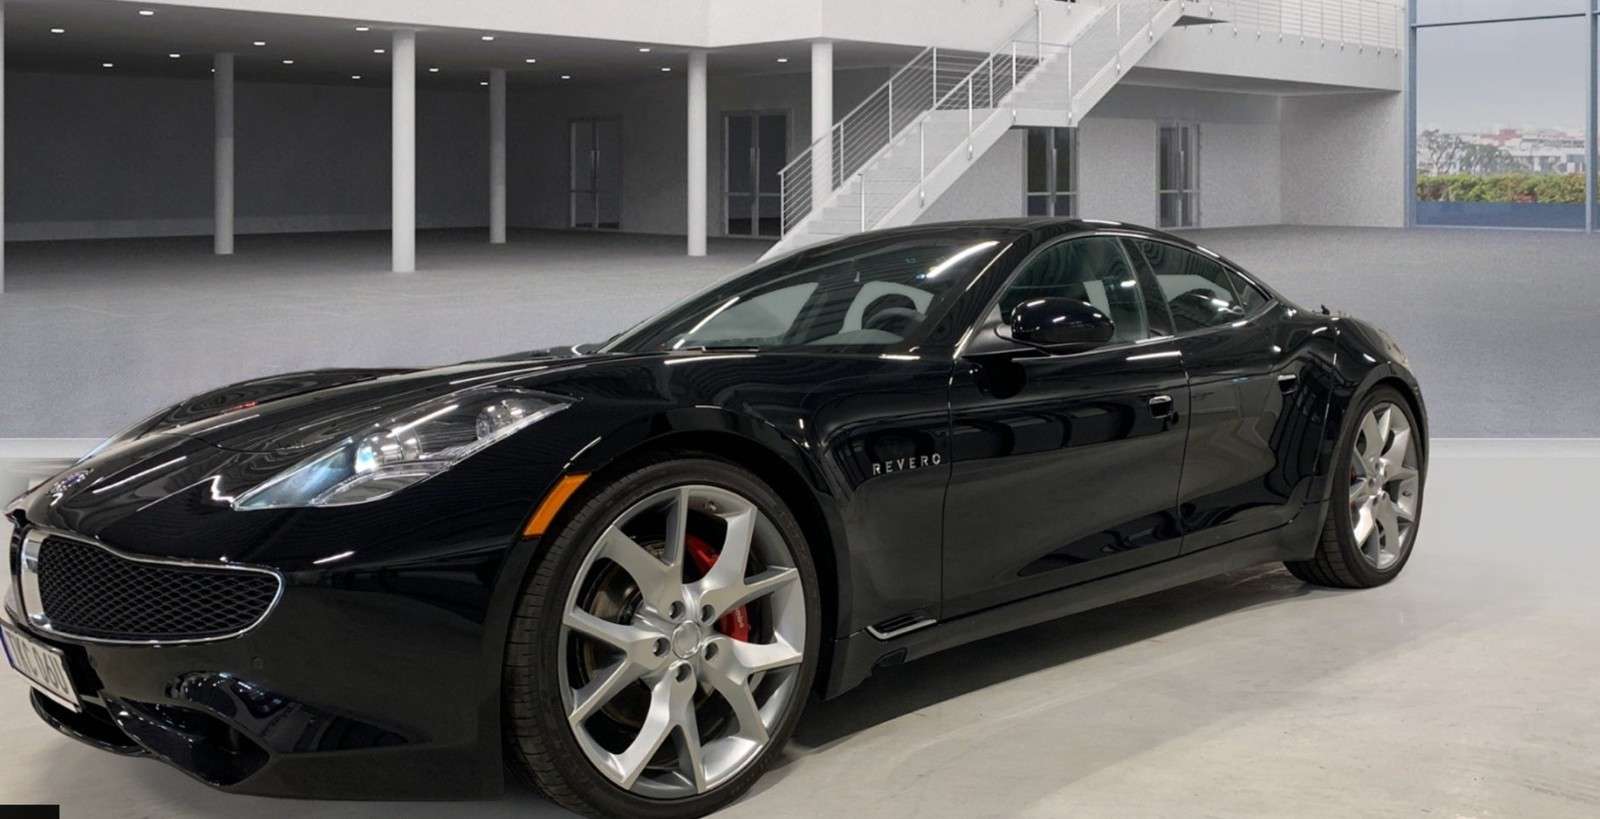 FISKER Karma Coupe in Black used in Wedel for € 49,900.-